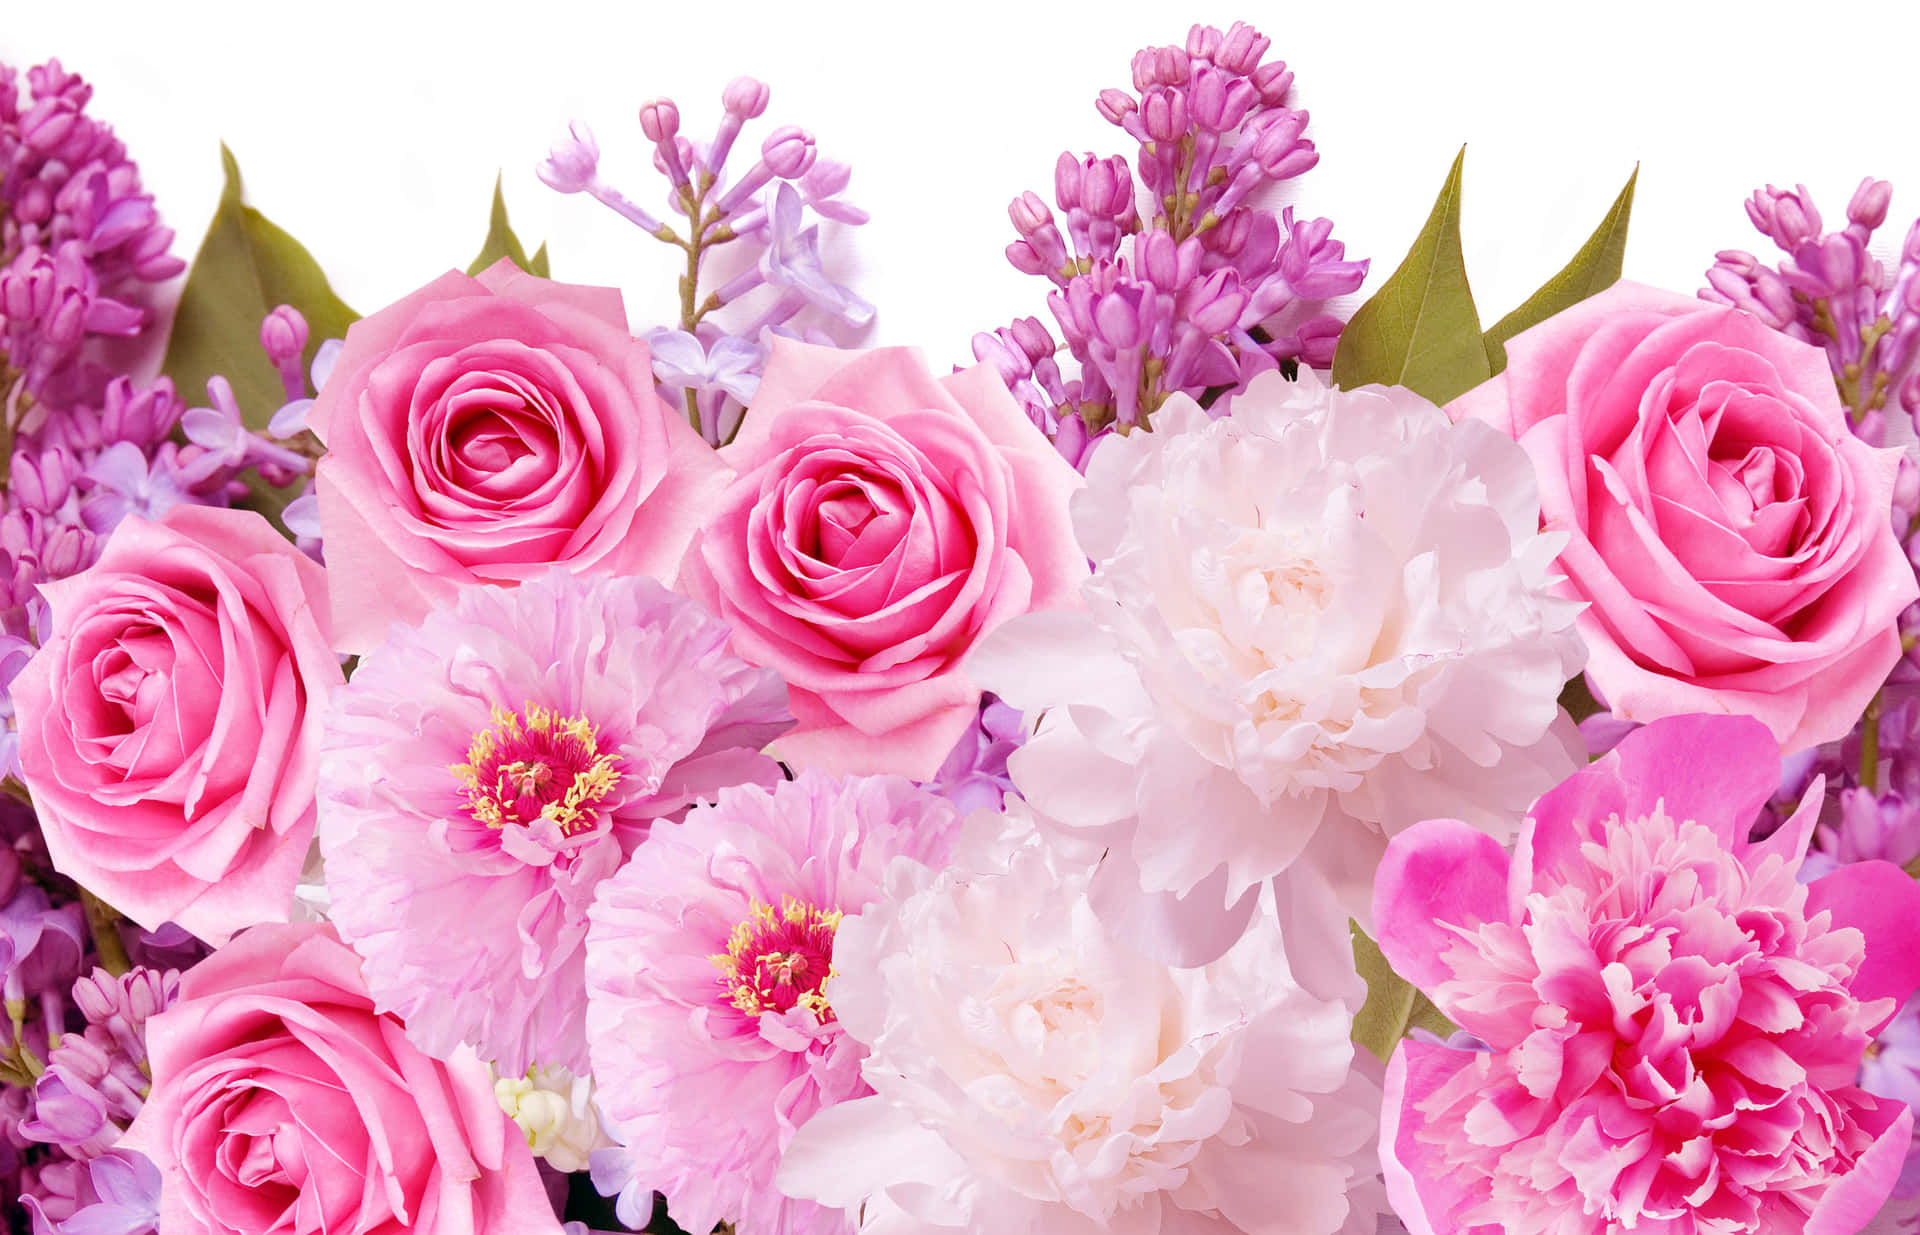 Pink And Purple Flowers In A Vase